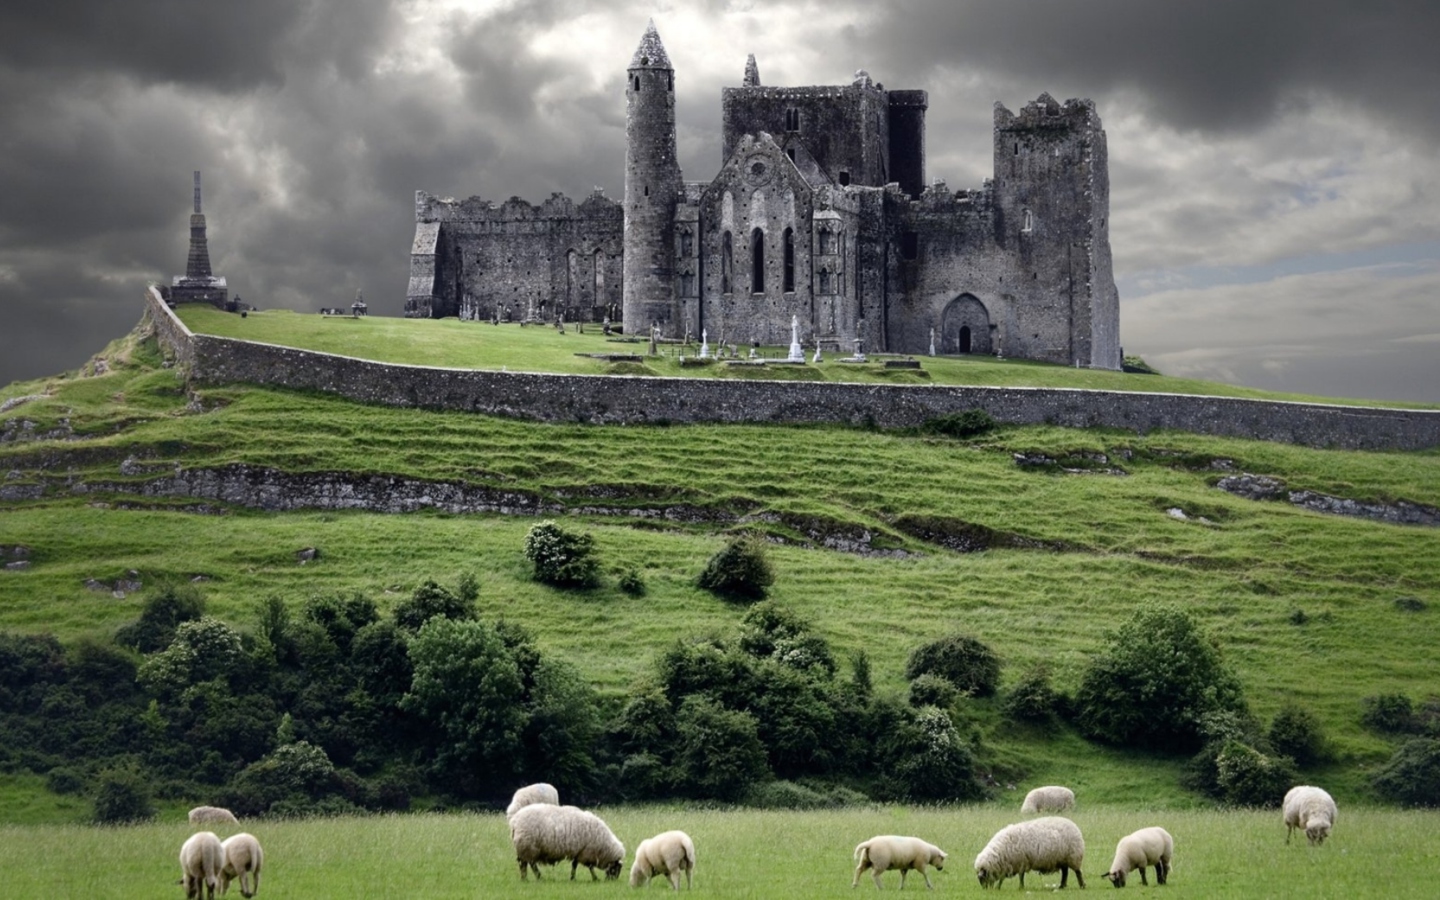 Das Ireland Landscape With Sheep And Castle Wallpaper 1440x900